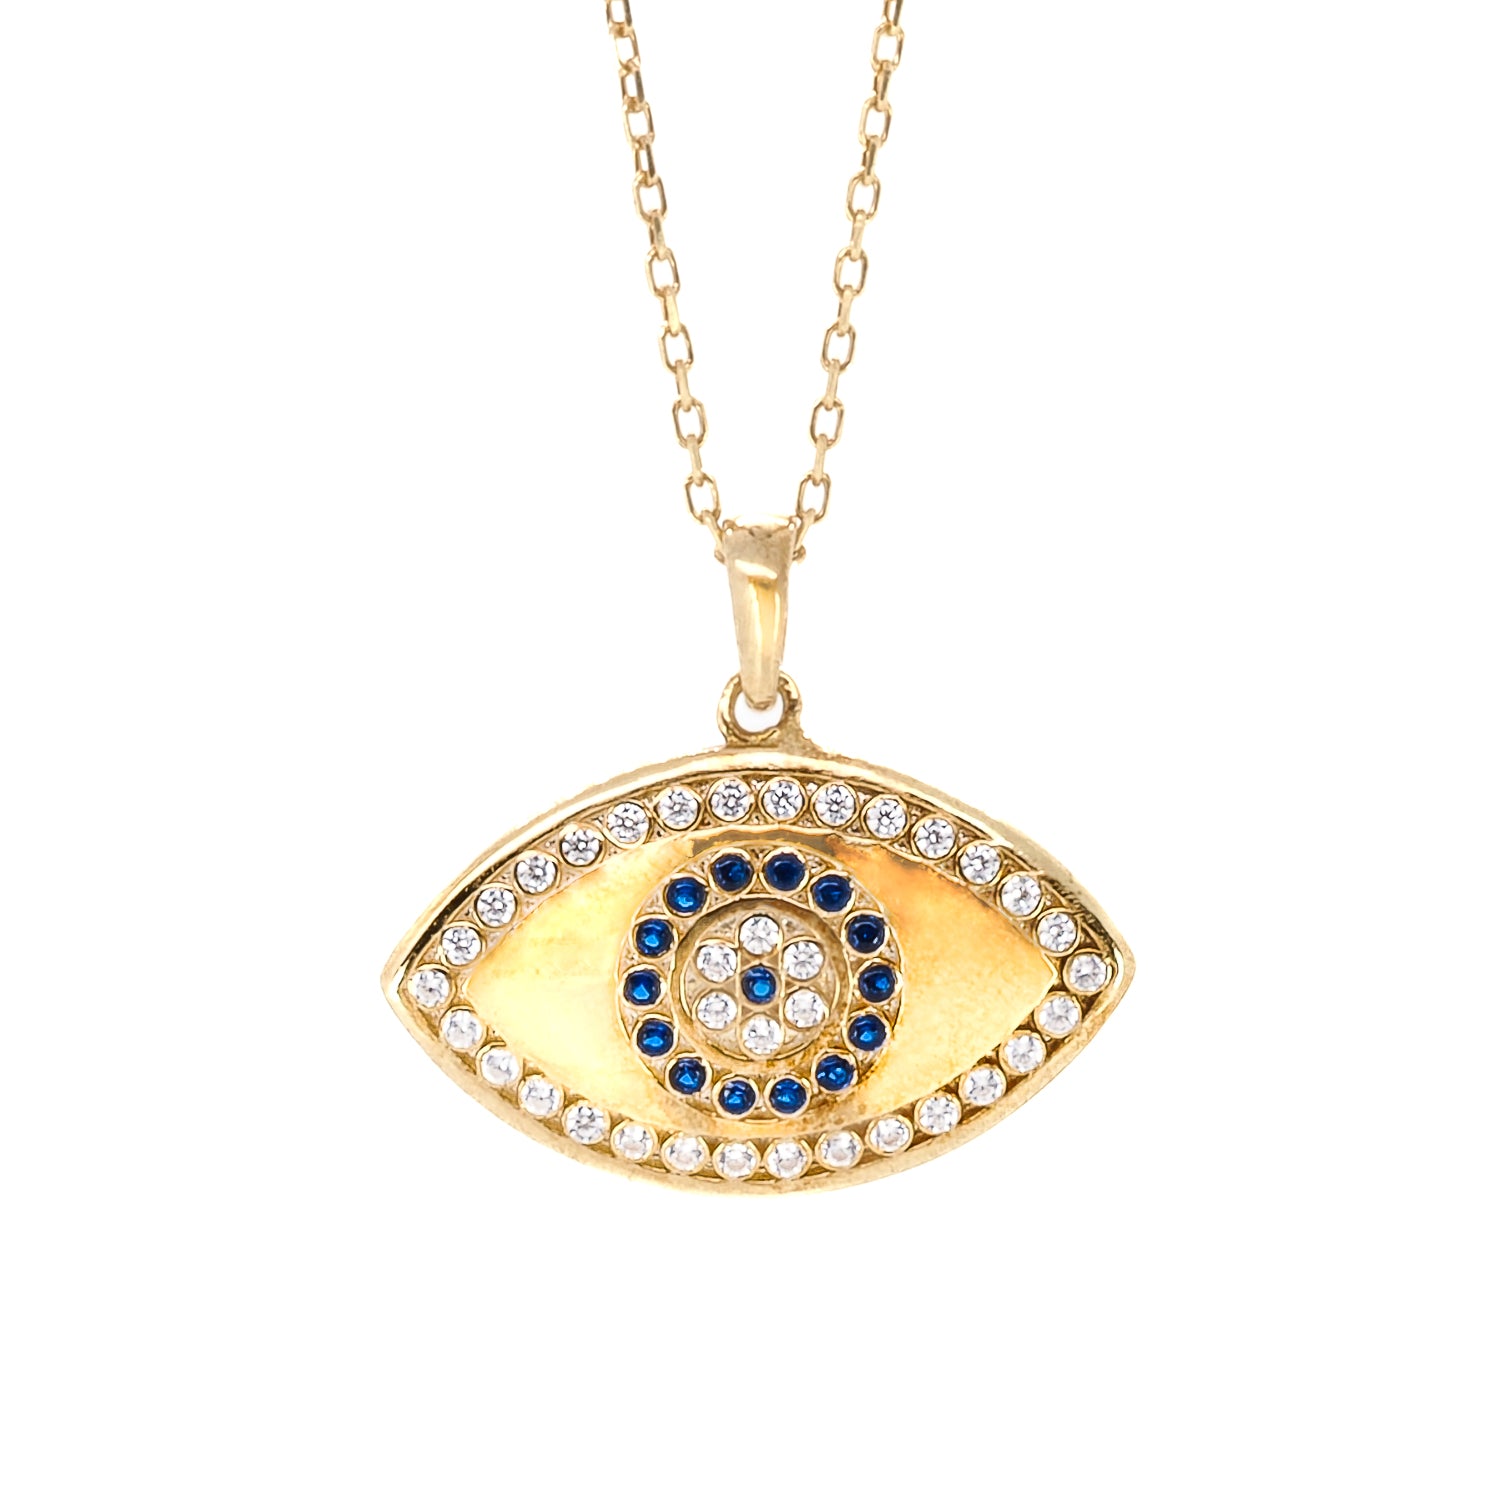 Stunning Evil Eye Necklace - Eye of Power pendant on a dainty chain, handmade with 925 solid silver and 14k gold plating.